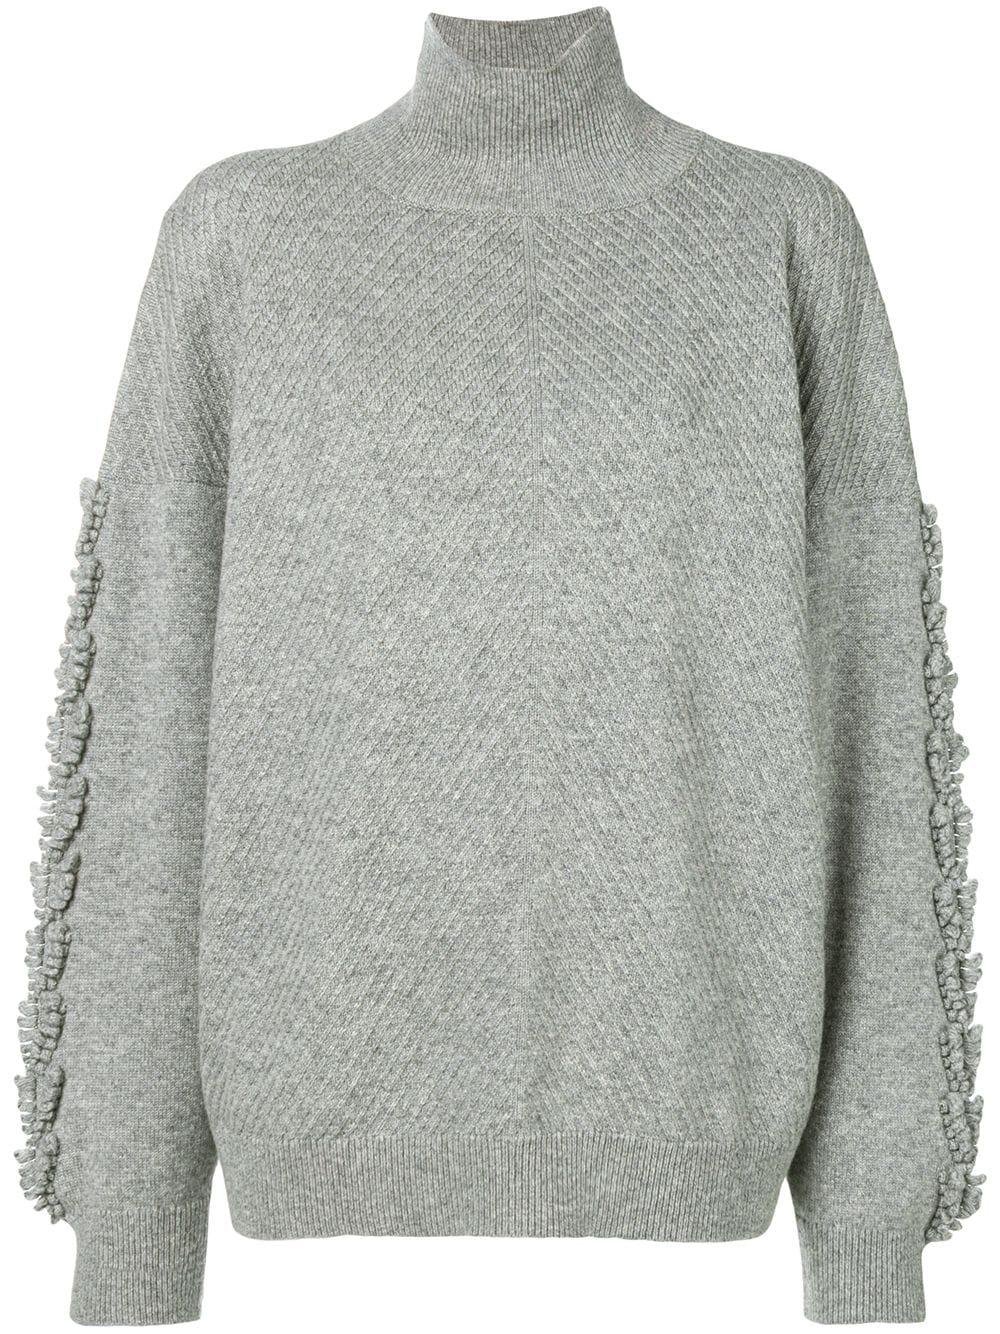 Troisieme Dimension cashmere turtleneck pullover by BARRIE